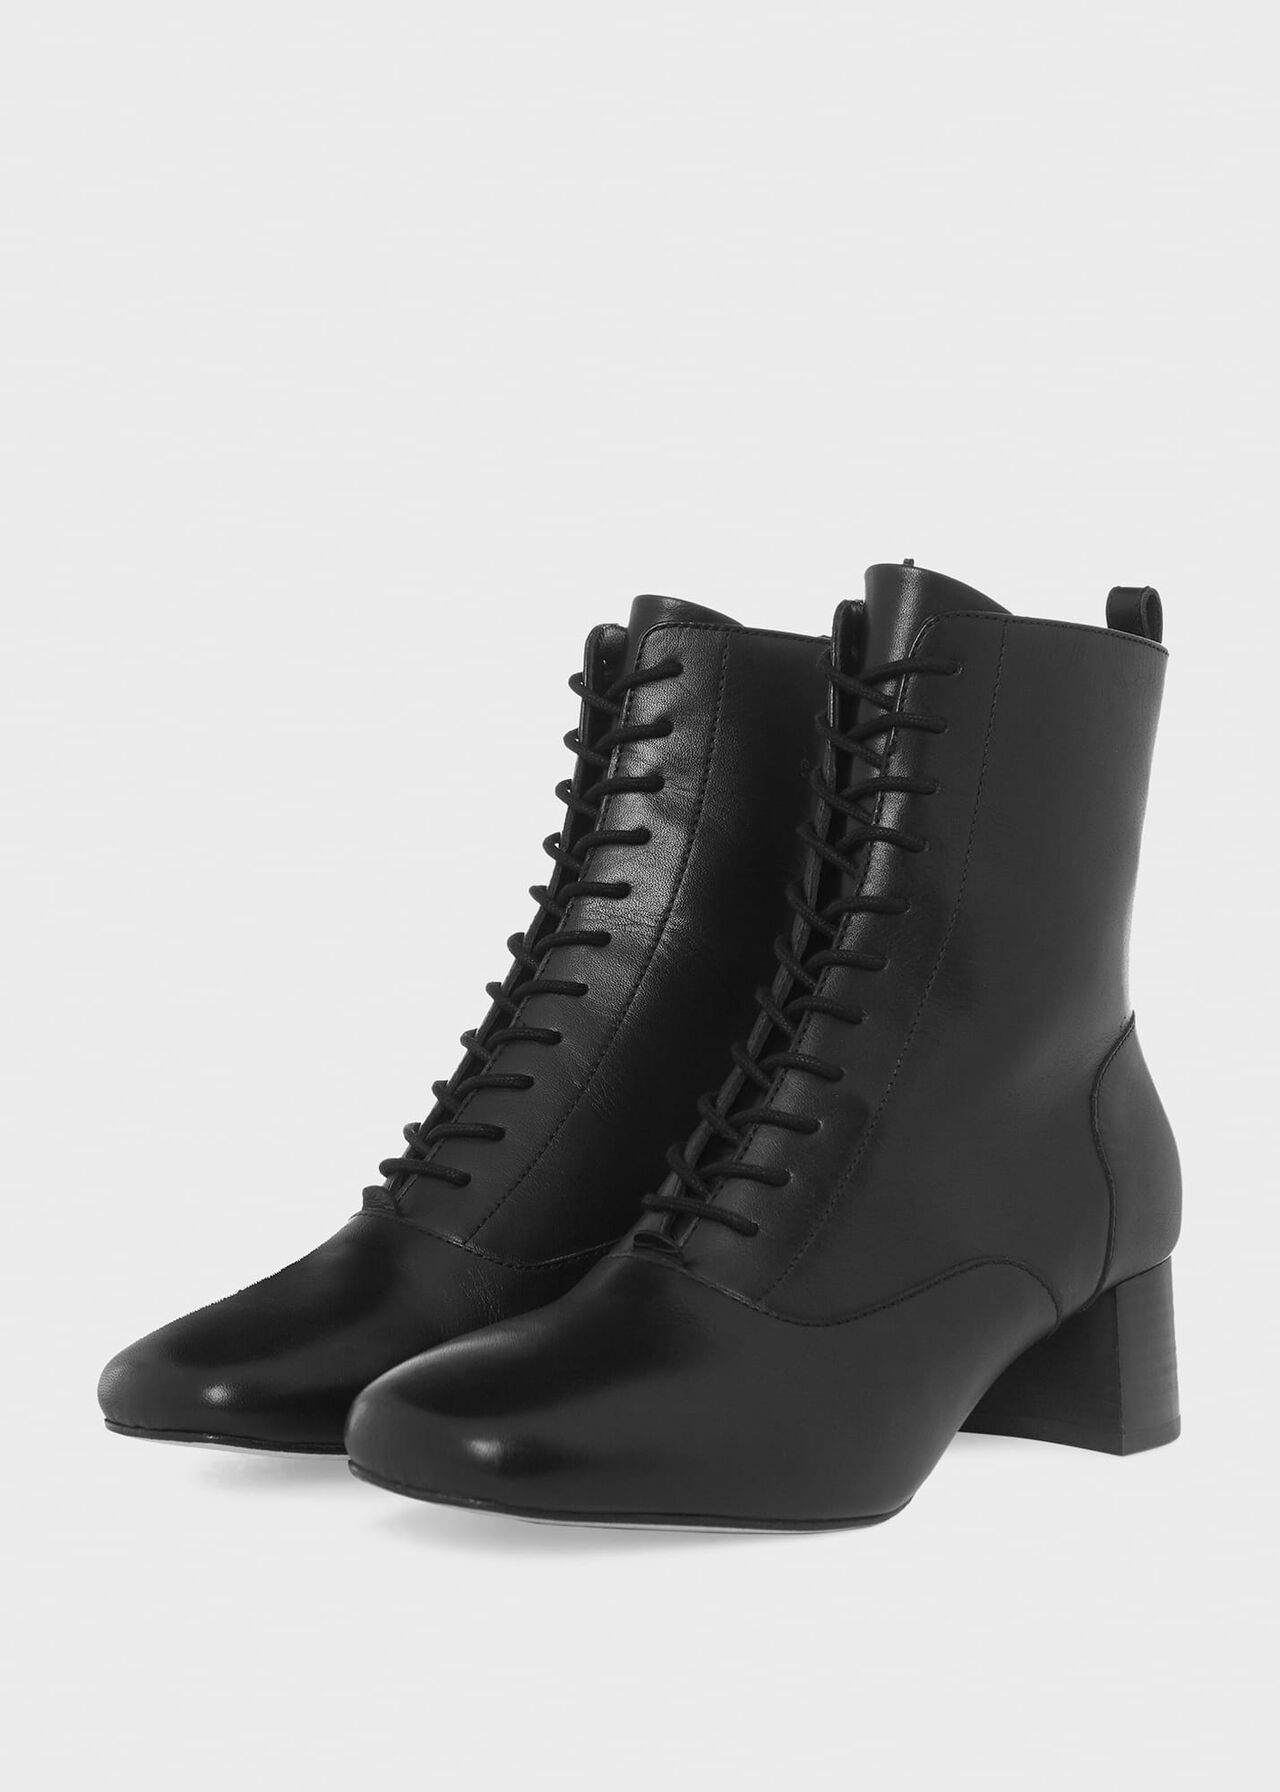 Issy Lace Up Boots, Black, hi-res